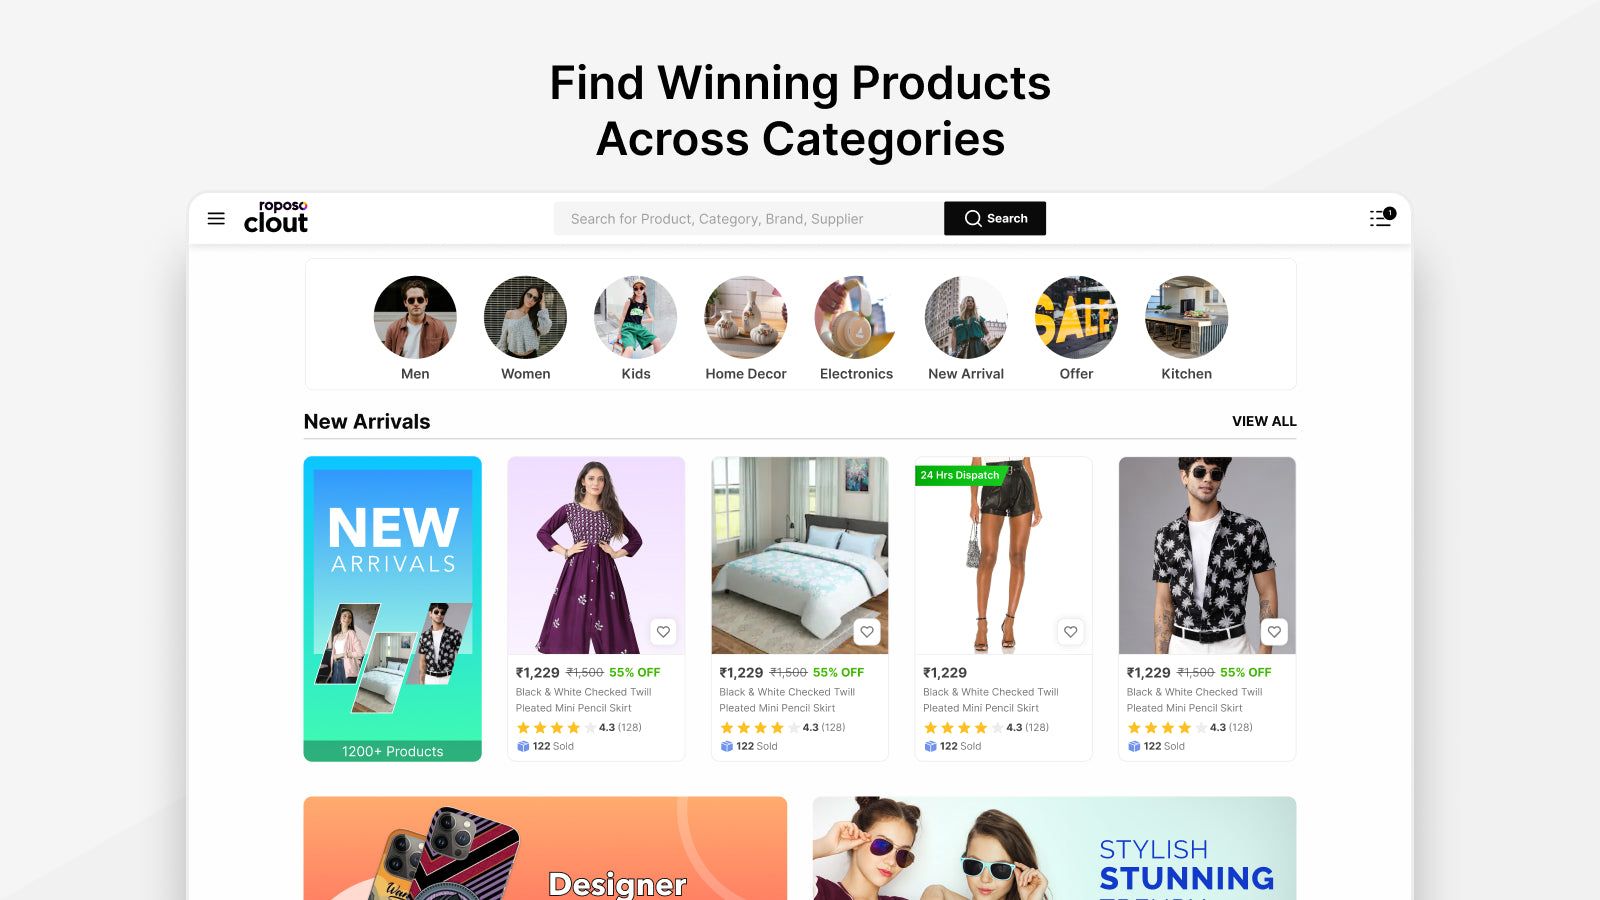 Winning Products Across a Wide Range of Categories